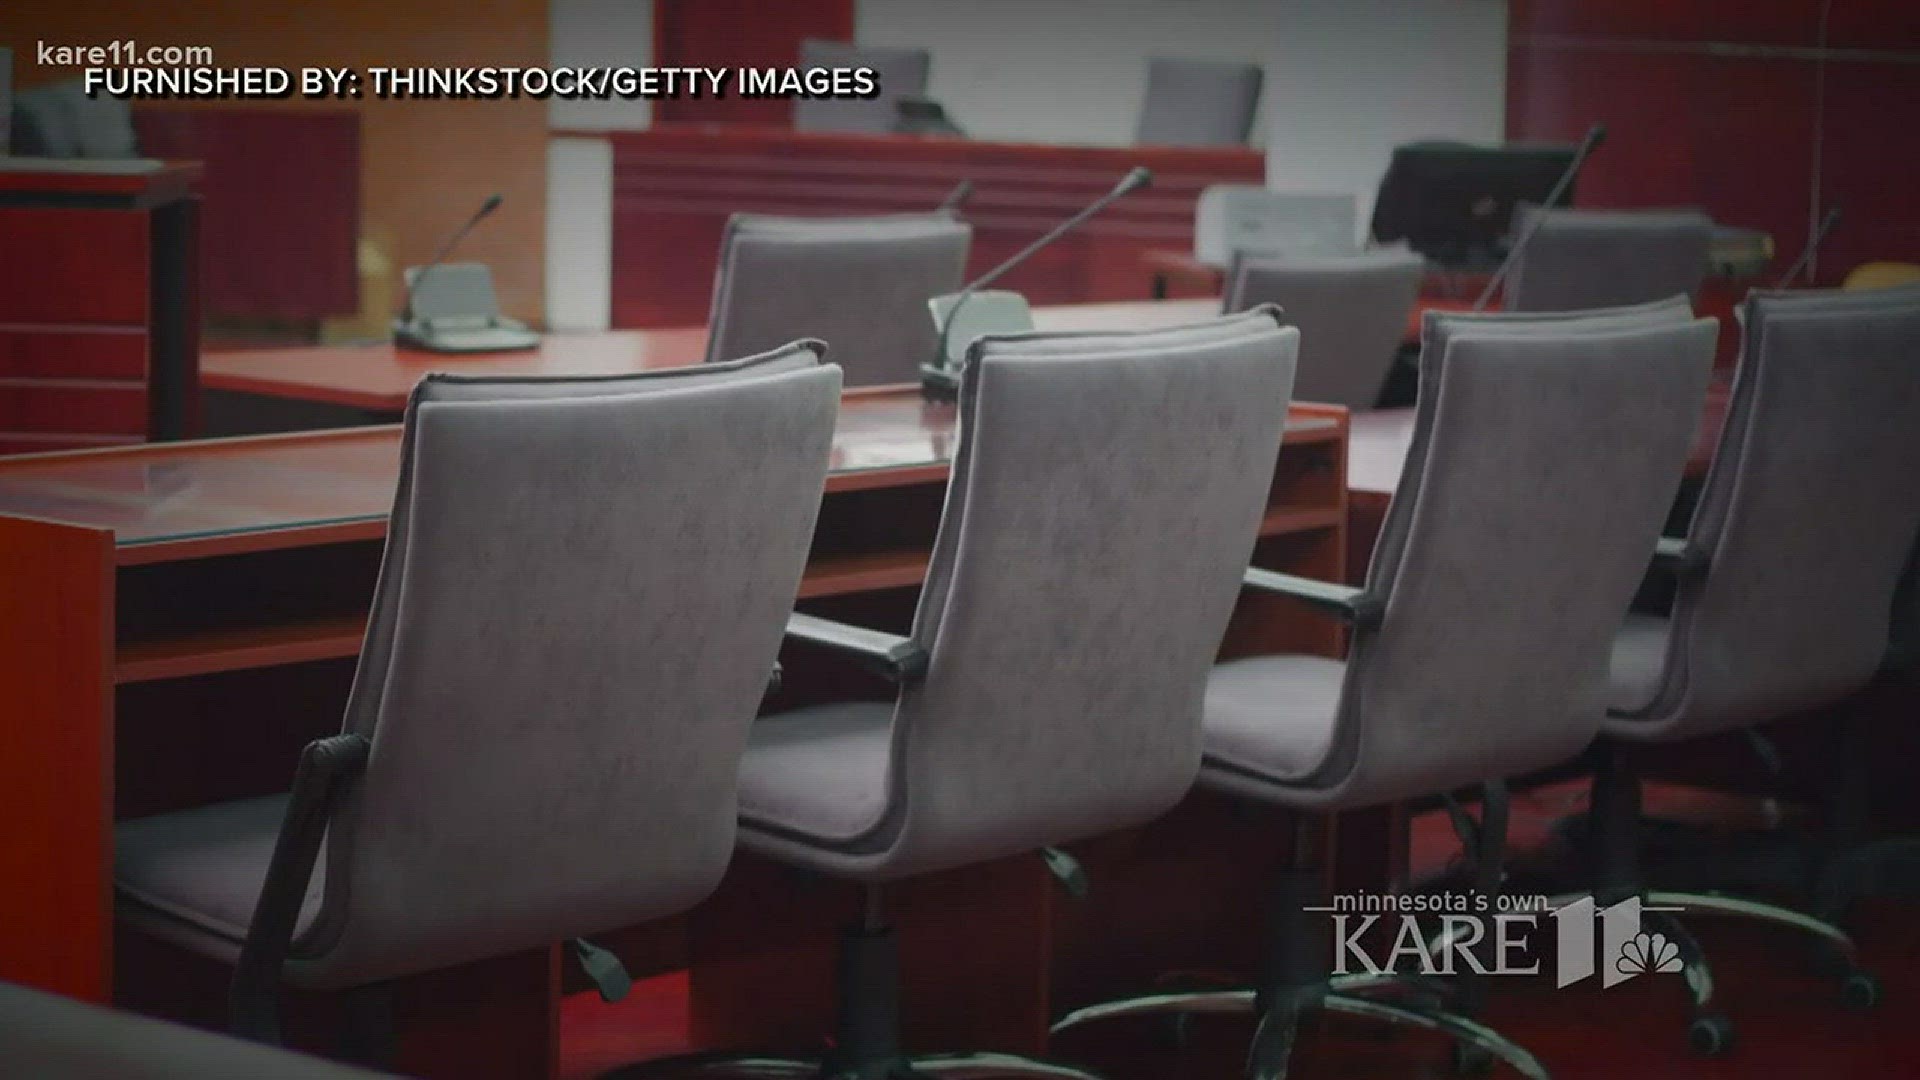 KARE 11's Lauren Leamanczyk explains how a grand jury works and how it plays a role in the case